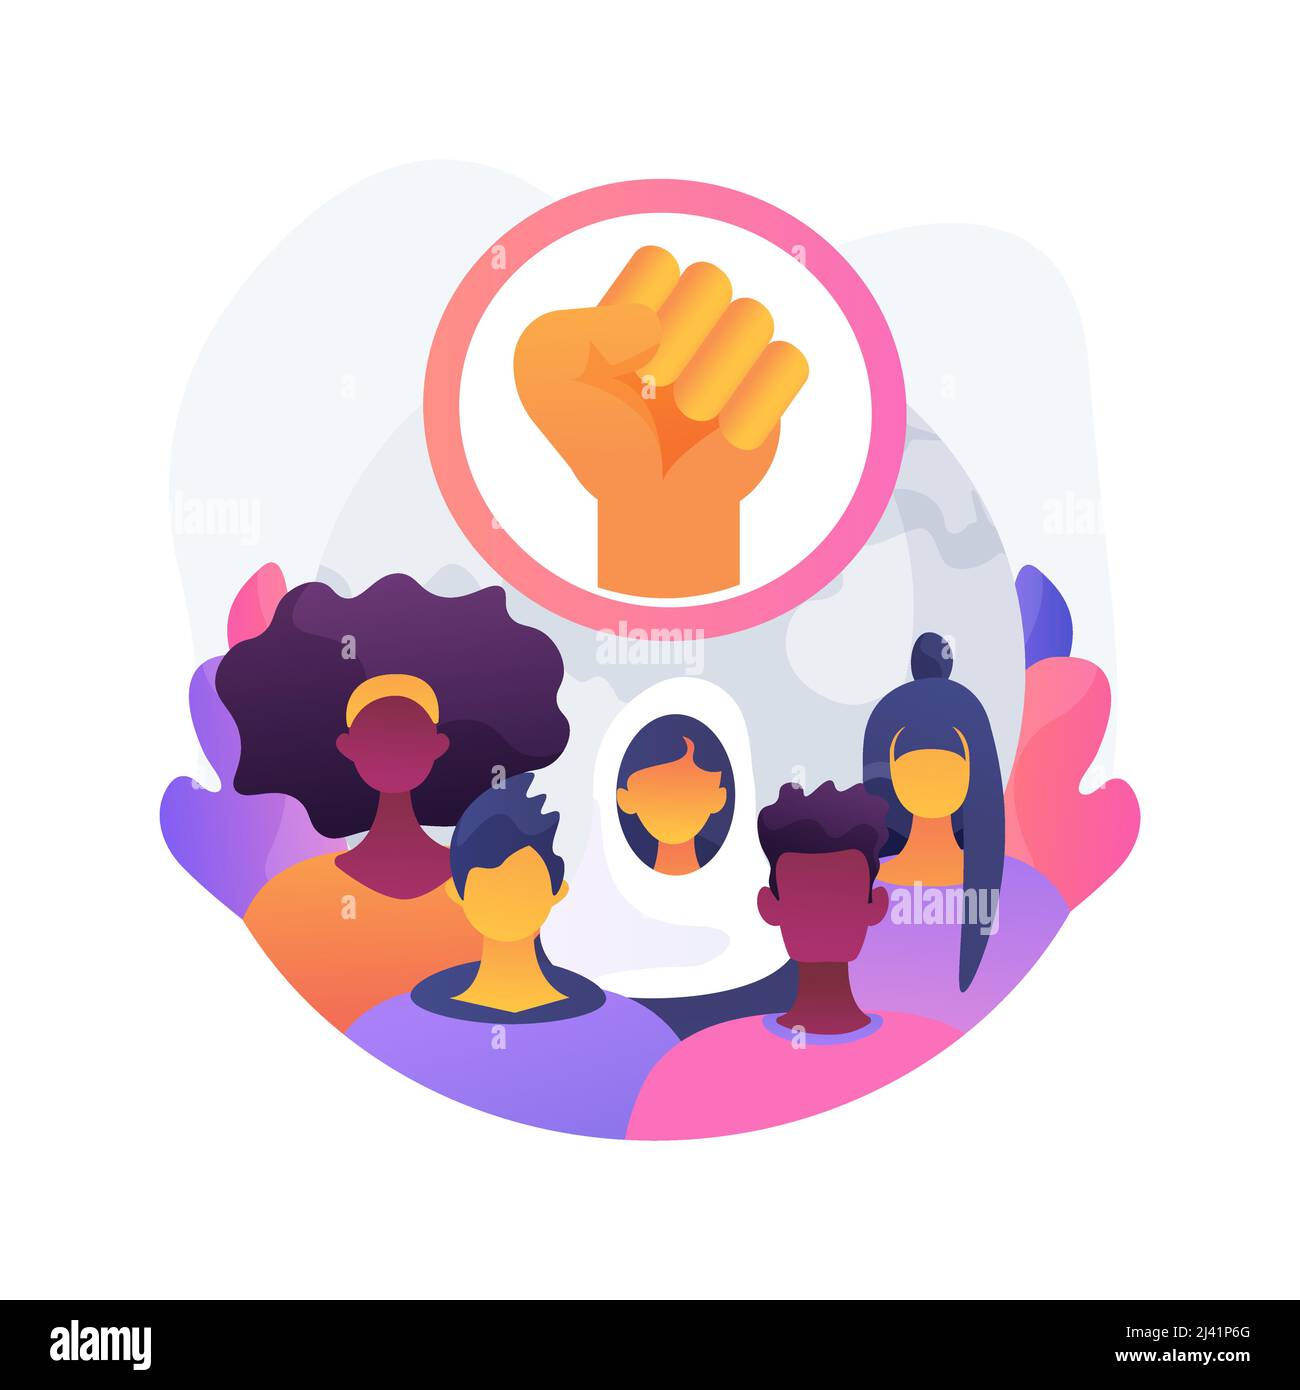 Youth empowerment abstract concept vector illustration. Children and young people take charge, take action, improve life quality, democracy building, Stock Vector